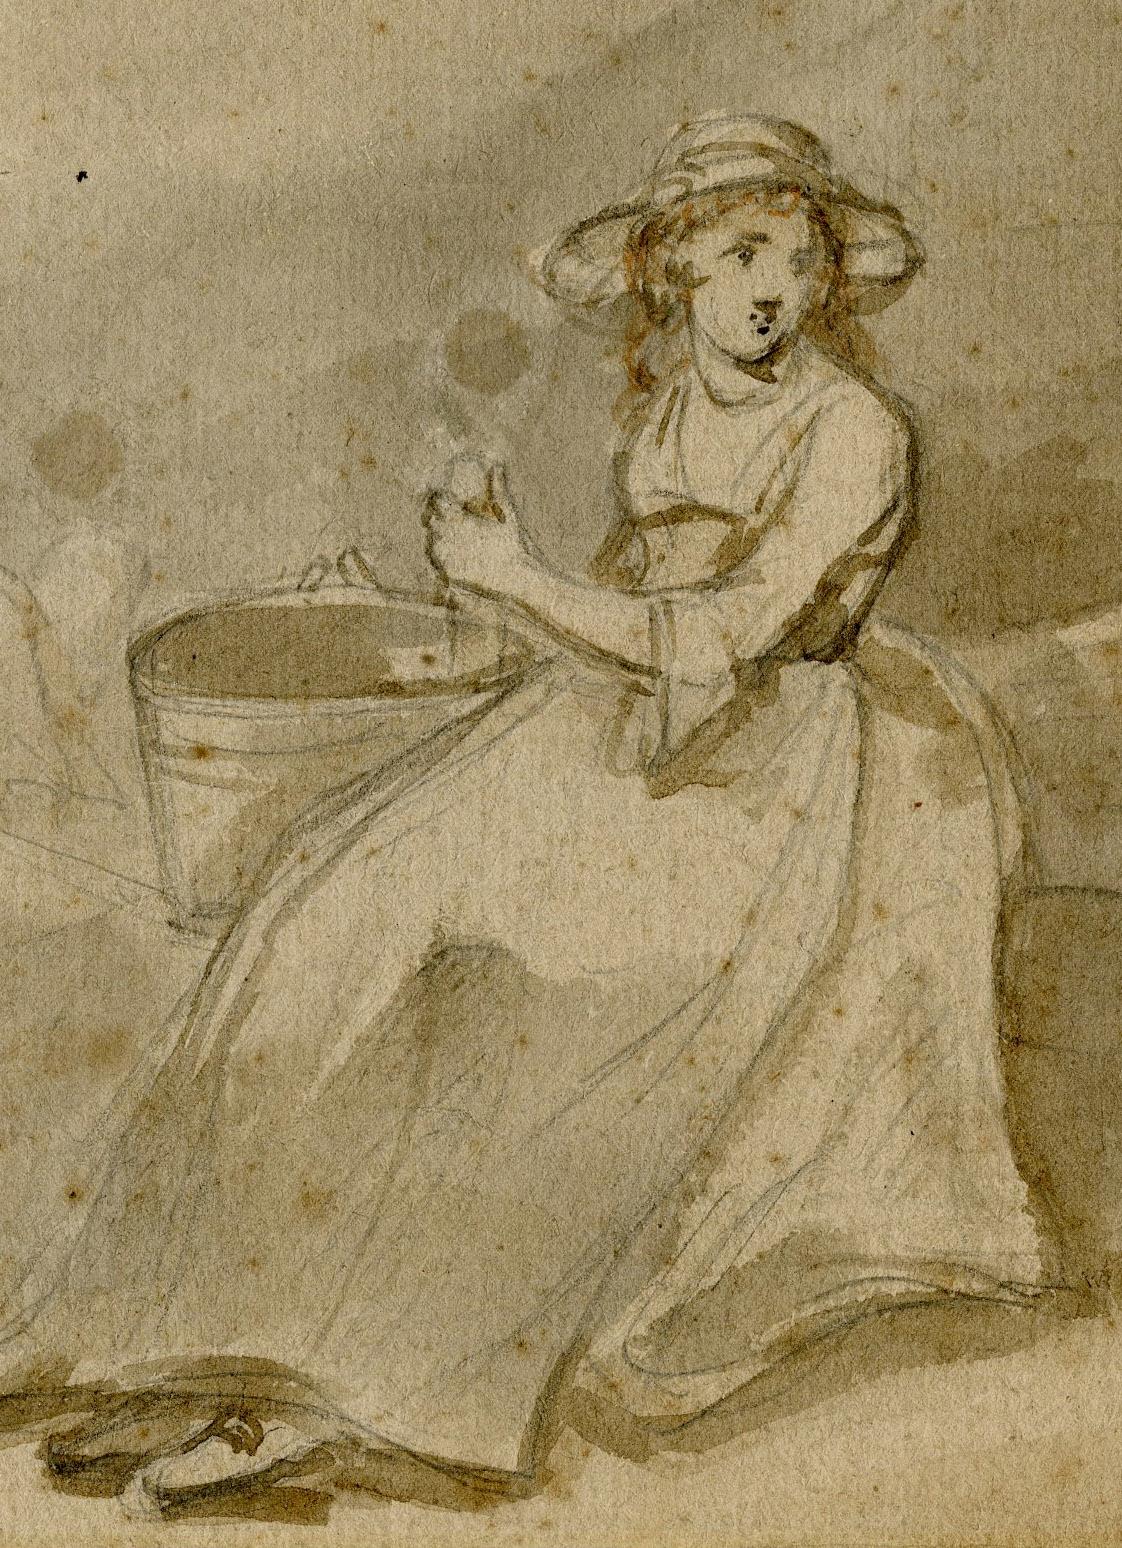 Family Group
Drawing in Chinese white, sepia and bistre ink, c. 1790
Signed lower left: G. Morland  (see photo)
The present work appears to be a preliminary study for two Morland paintings where the artist uses portions of this preliminary study in